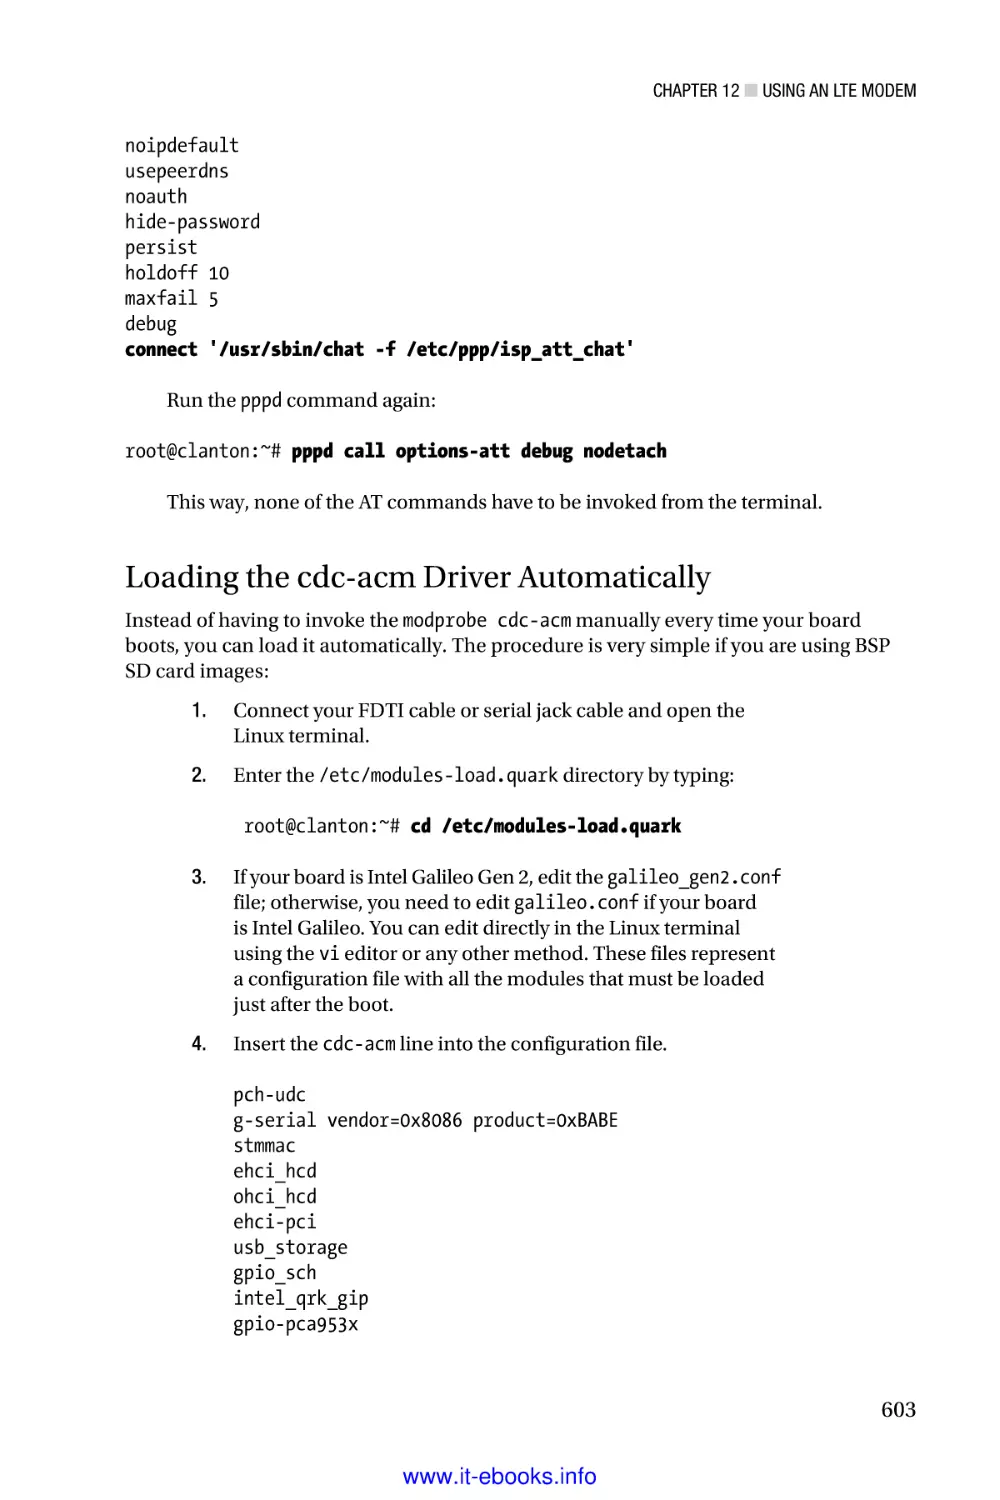 Loading the cdc-acm Driver Automatically